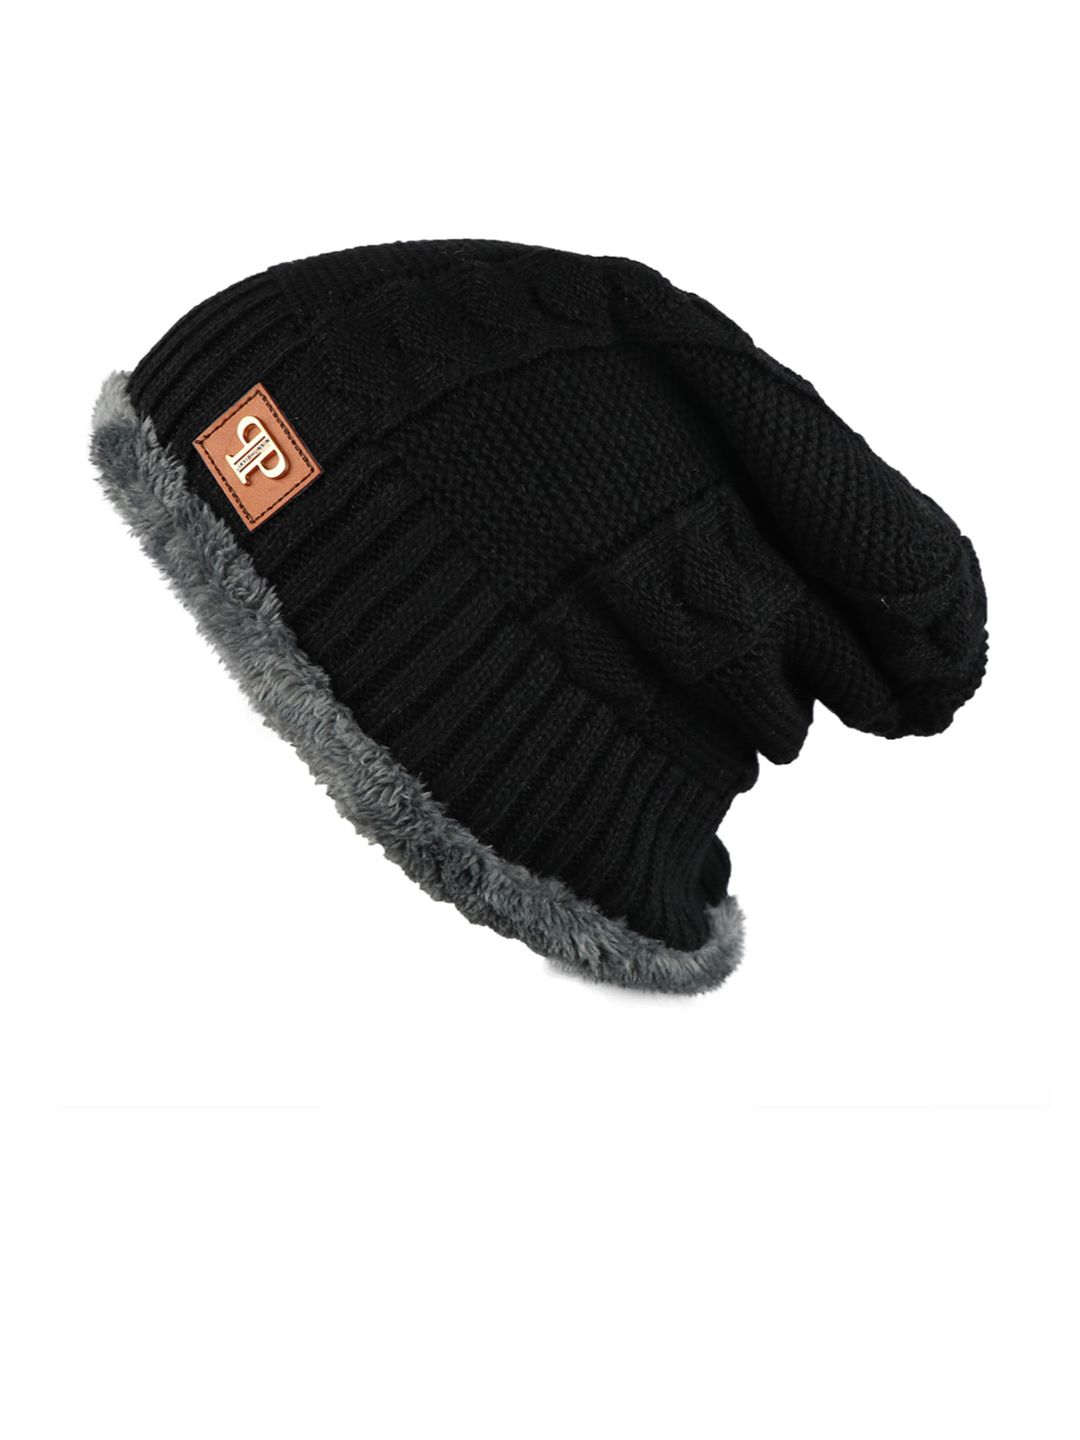 iSWEVEN Unisex Black Self-Design Woven Expandable Beanie Price in India